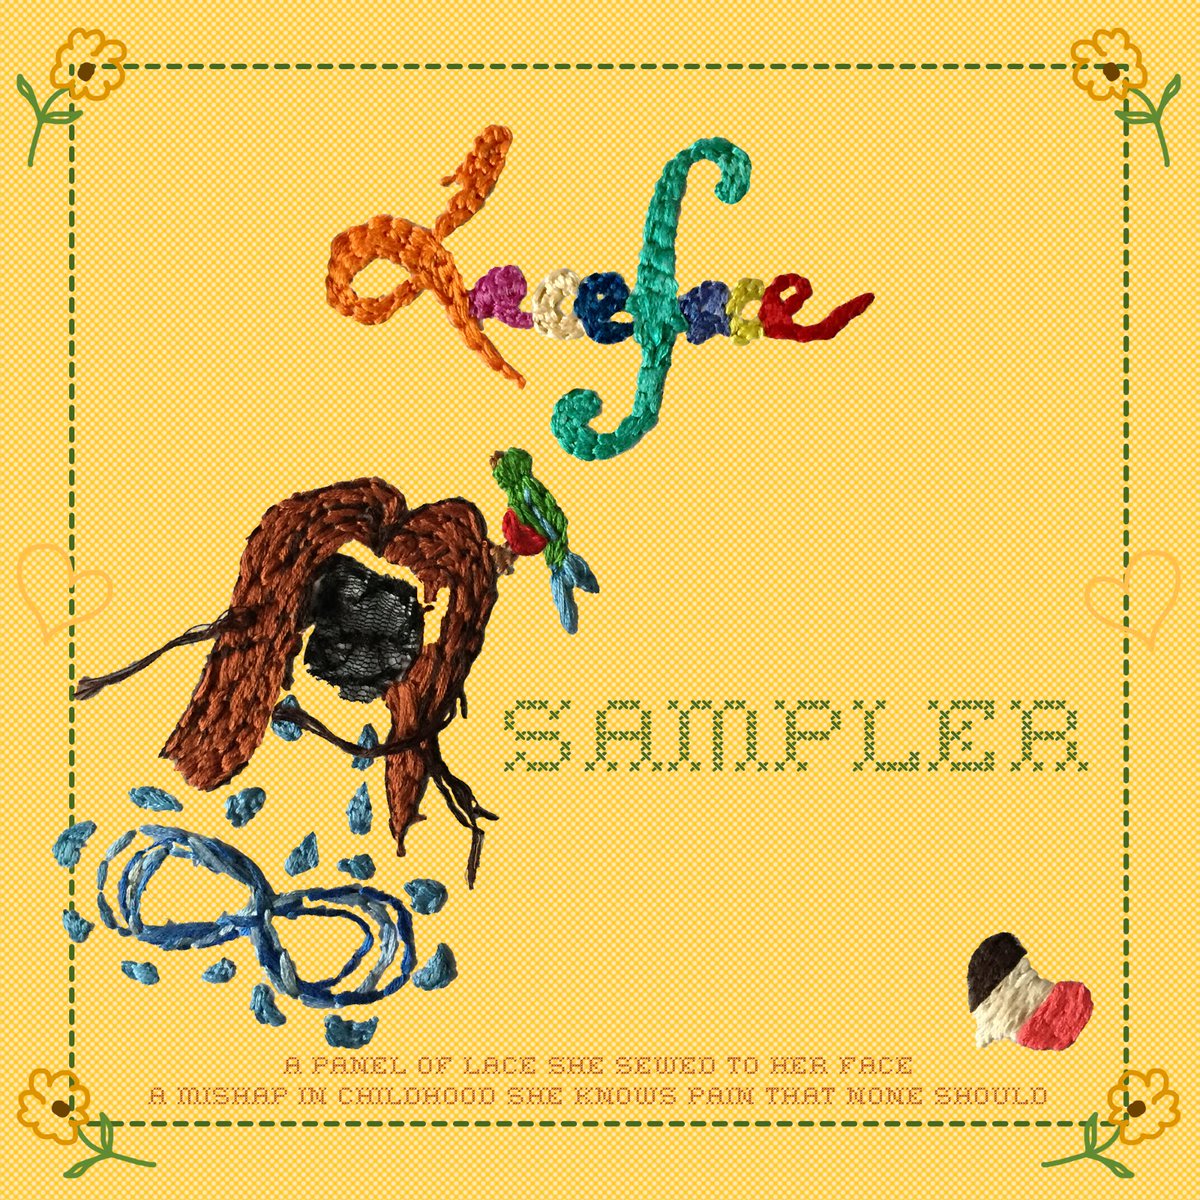 It’s getting to the time of year for sweet treats and tricks. Here’s my latest called Sampler. Lots of little bite sized delights to share with my friends. laceface.bandcamp.com/album/sampler #laceface #cellorock #embroidery #cello #halloween #avantgarde #whammydt #ringmodulator #shredding